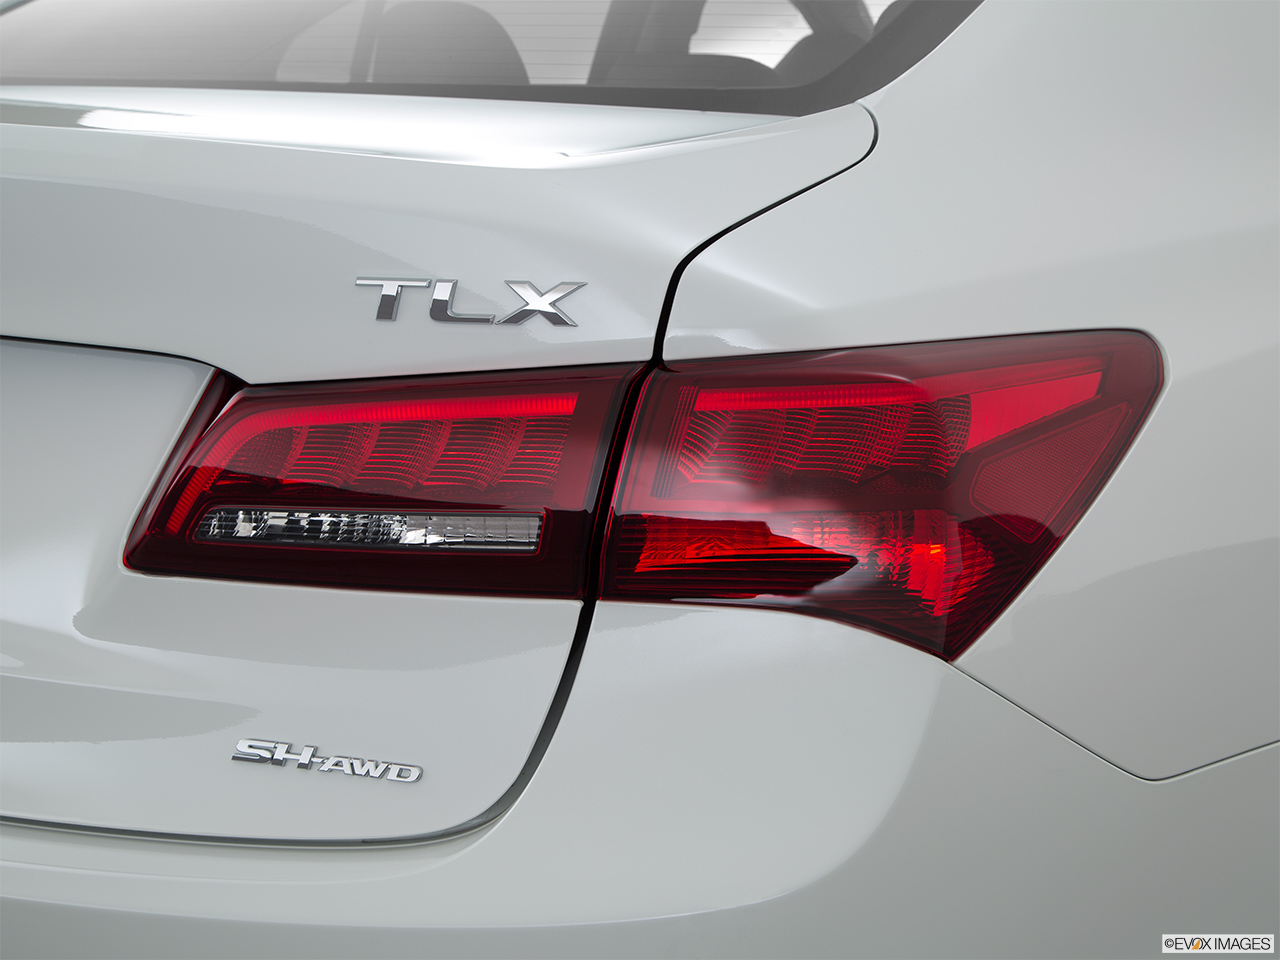 2015 Acura TLX 3.5 V-6 9-AT SH-AWD Passenger Side Taillight. 